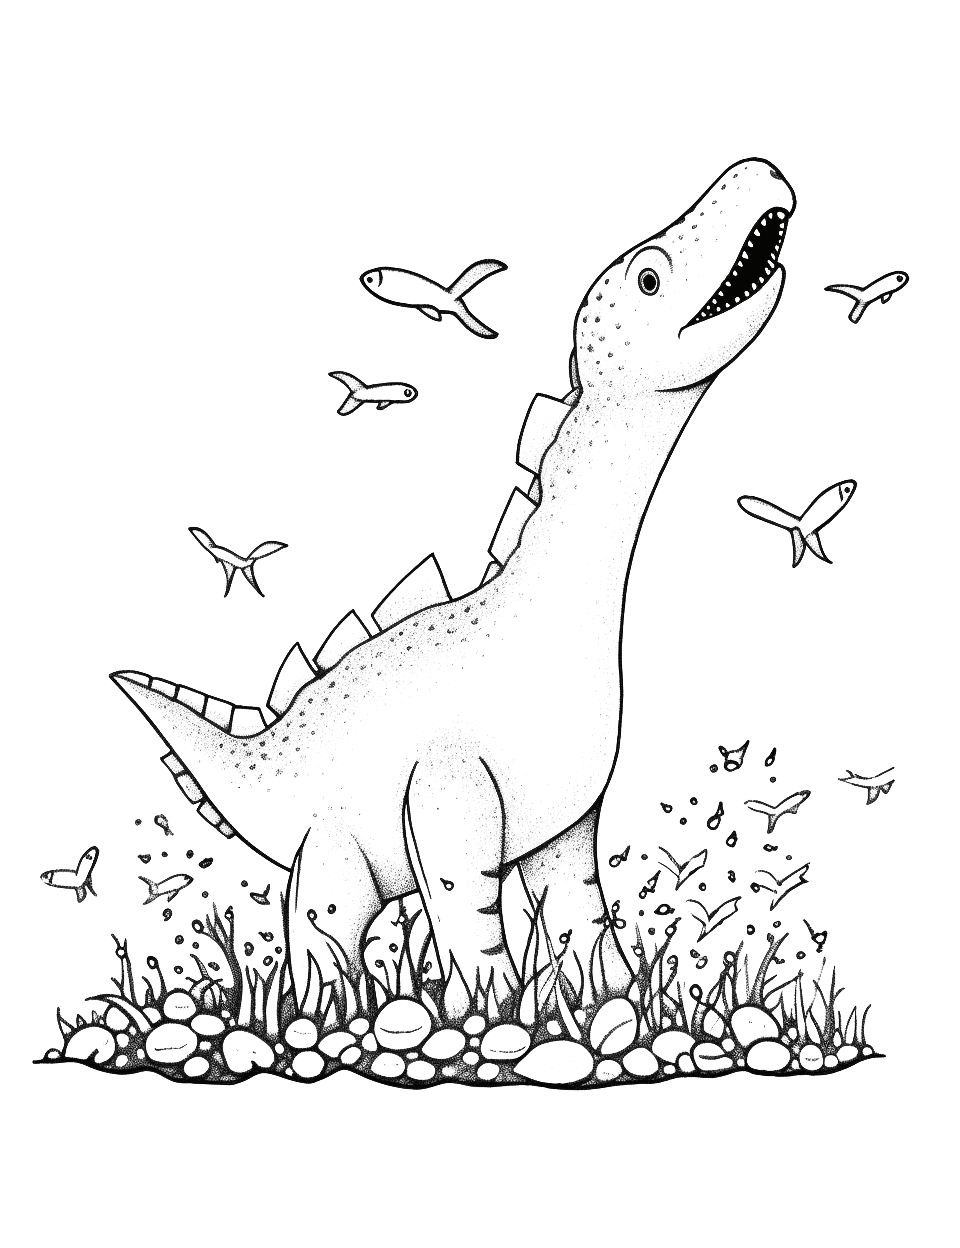 Mosasaurus Feeding Time Coloring Page - The gigantic Mosasaurus leaping out of water to catch its prey.